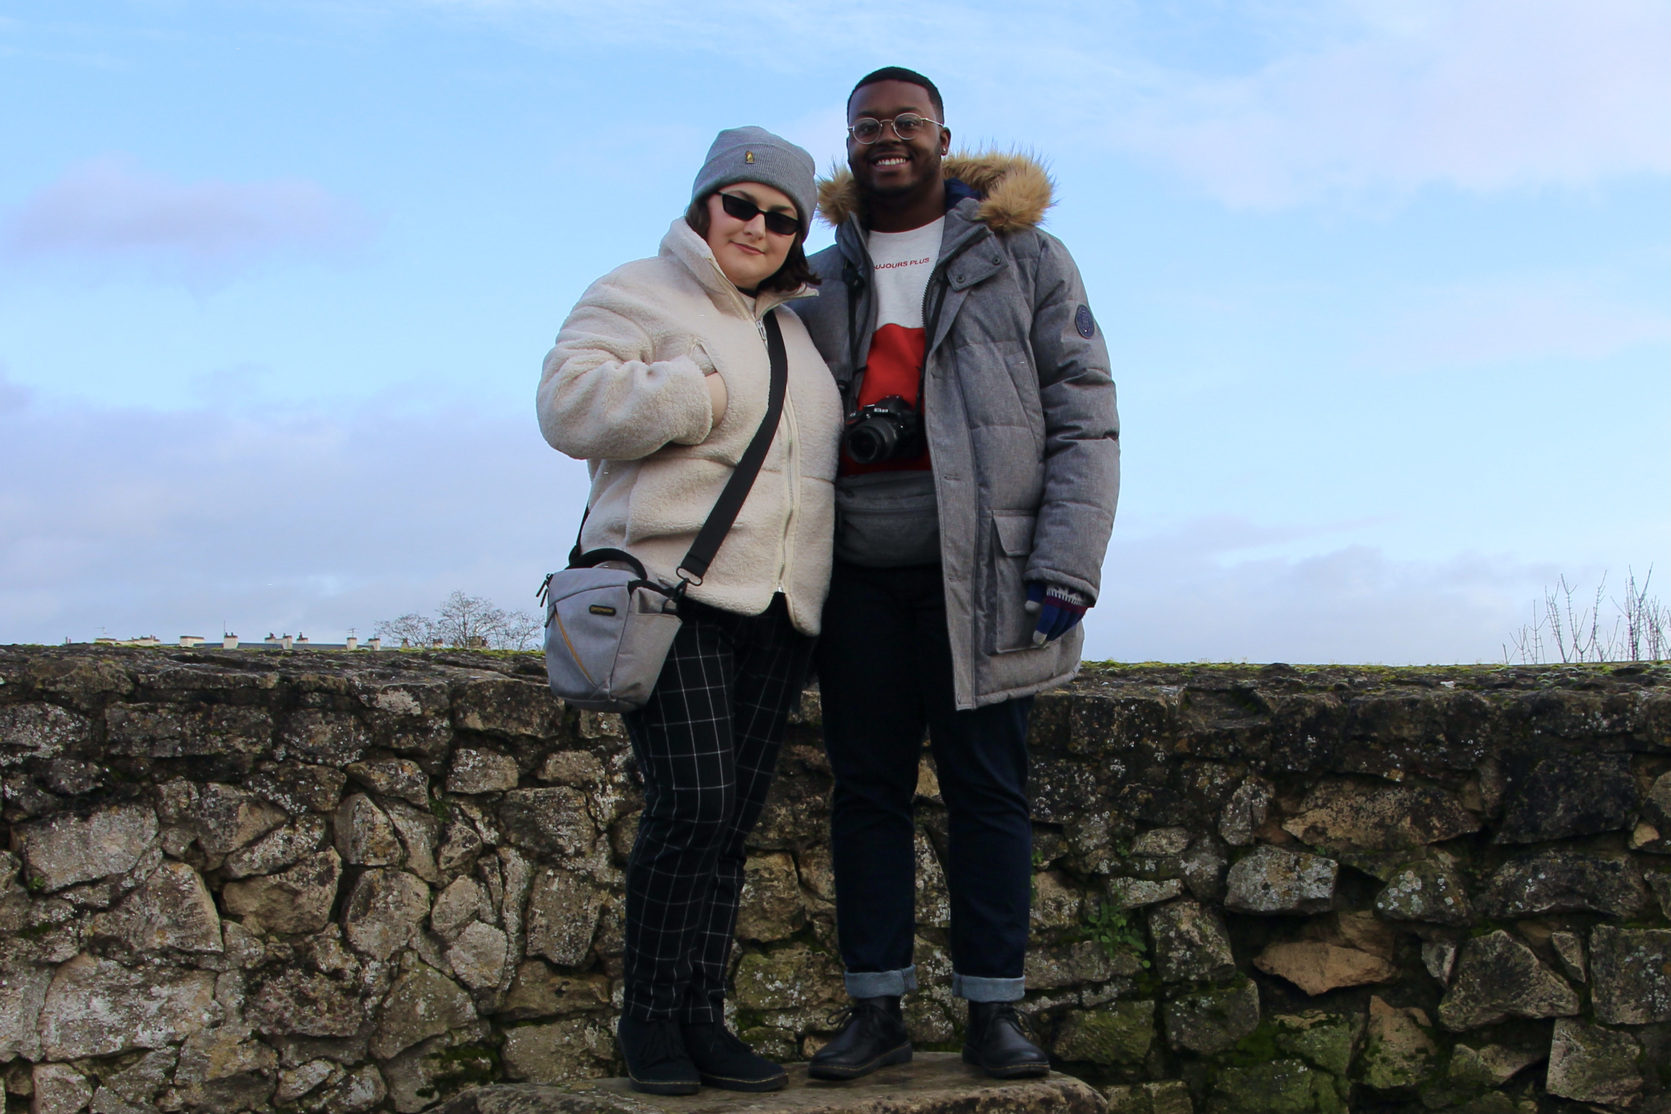 Maria and Jalen posing together in Caen, France.